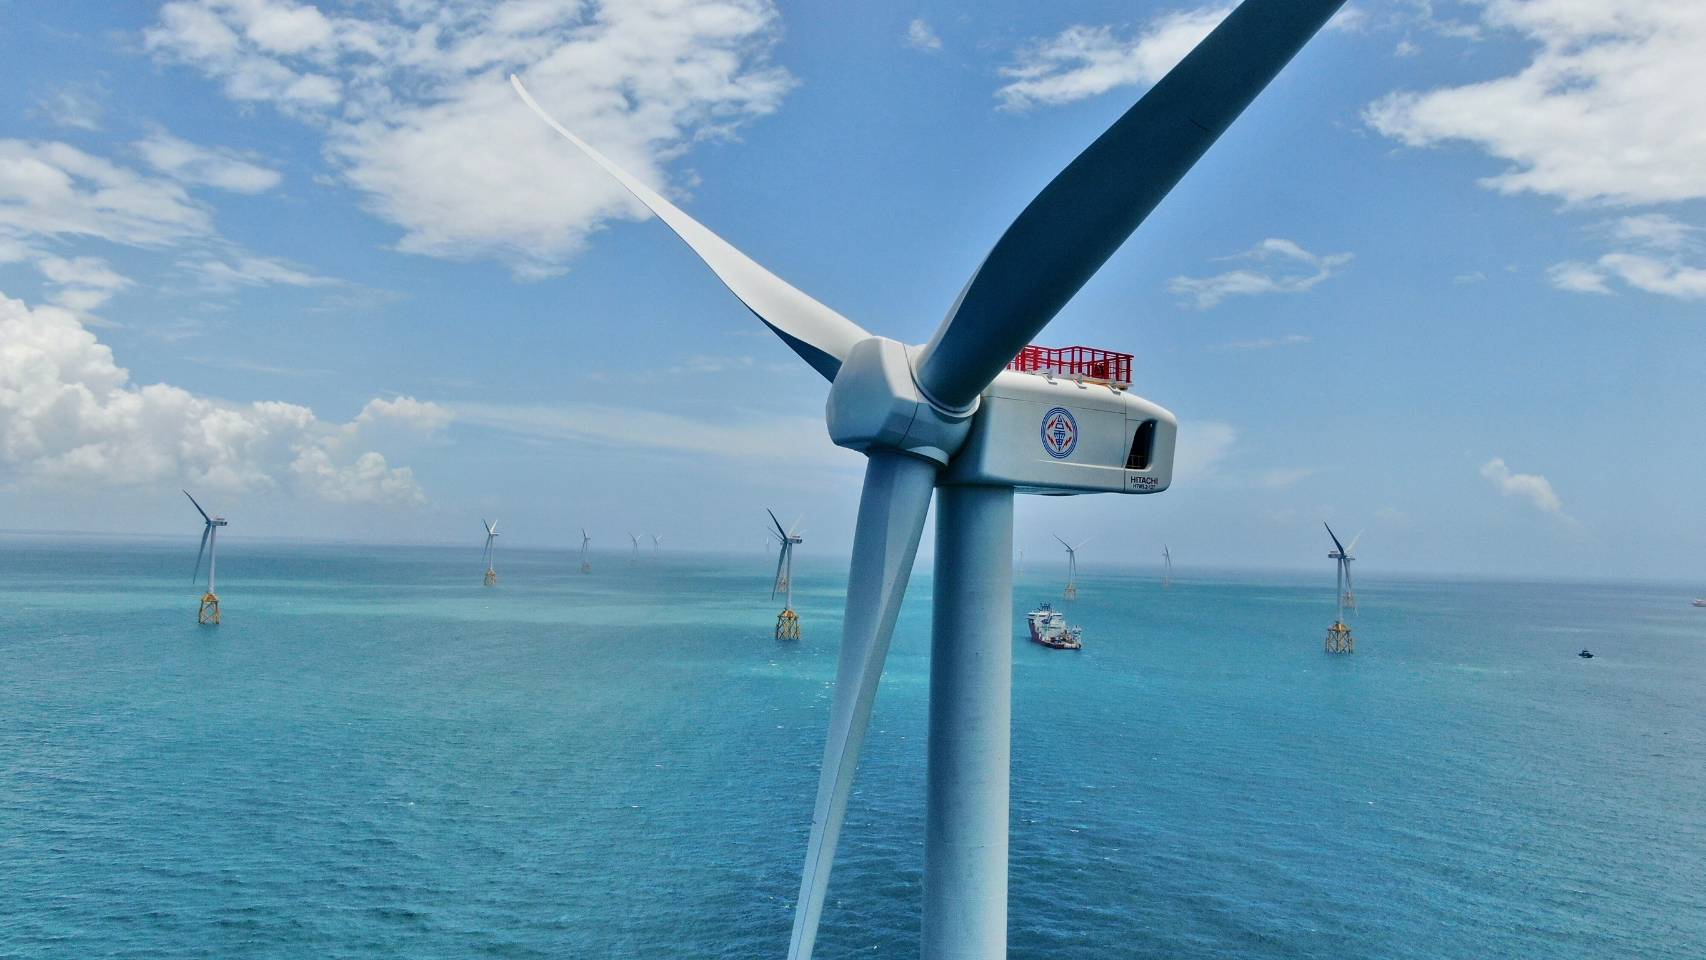 A photo of the TPC Changhua Phase 1 offshore wind farm